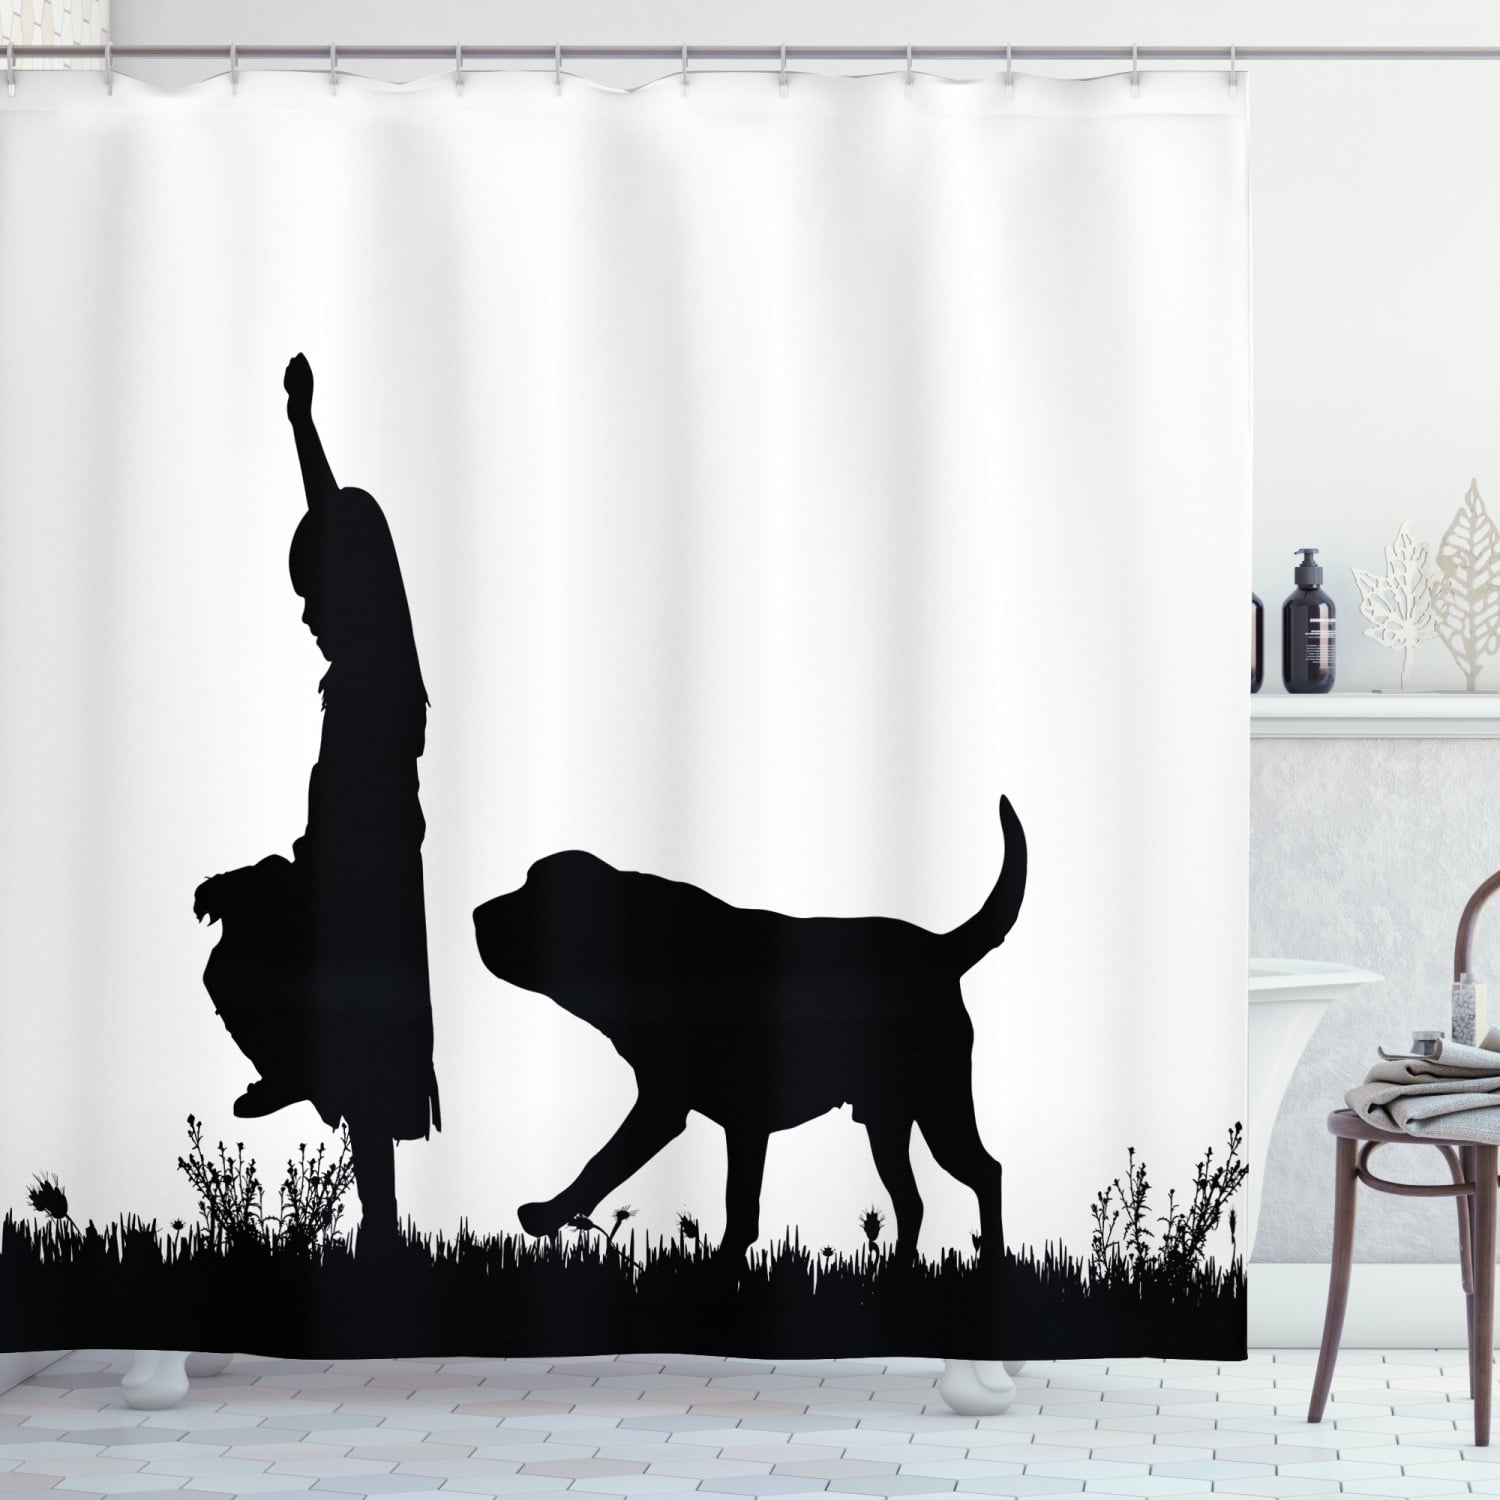 Painted Basset Hound Shower Curtain Bathroom Decor Fabric & 12hooks 71*71inches 